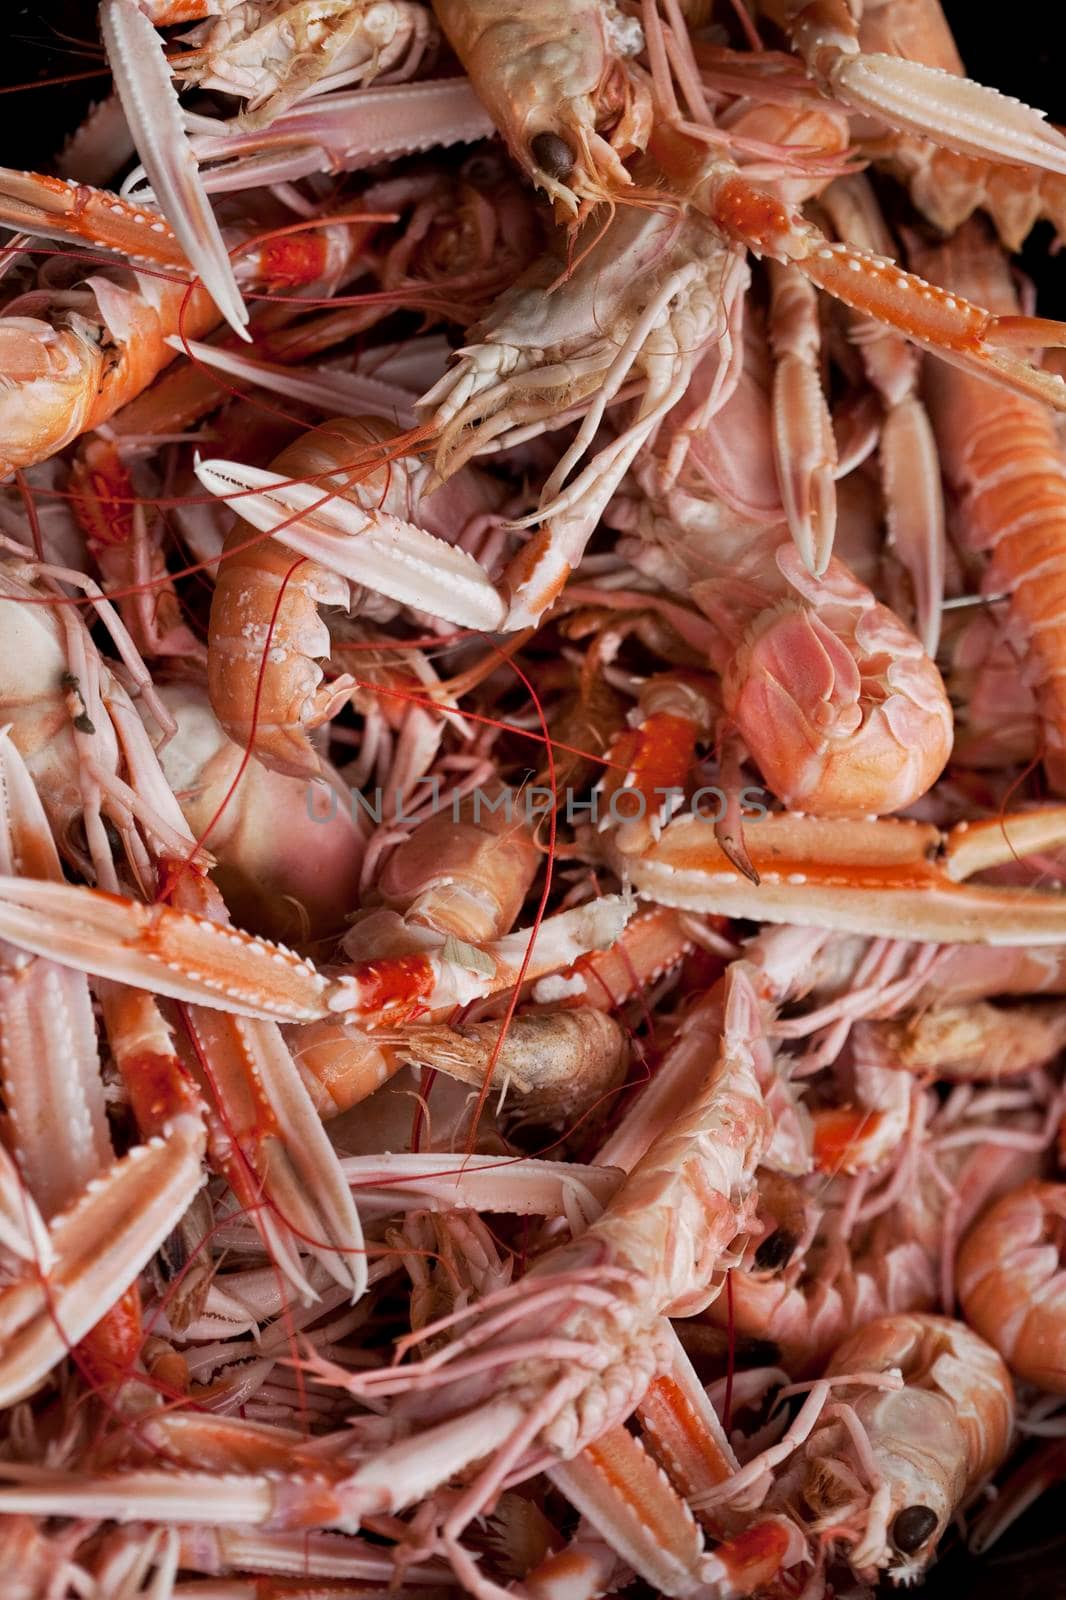 Scampi in a fish store by jacques_palut